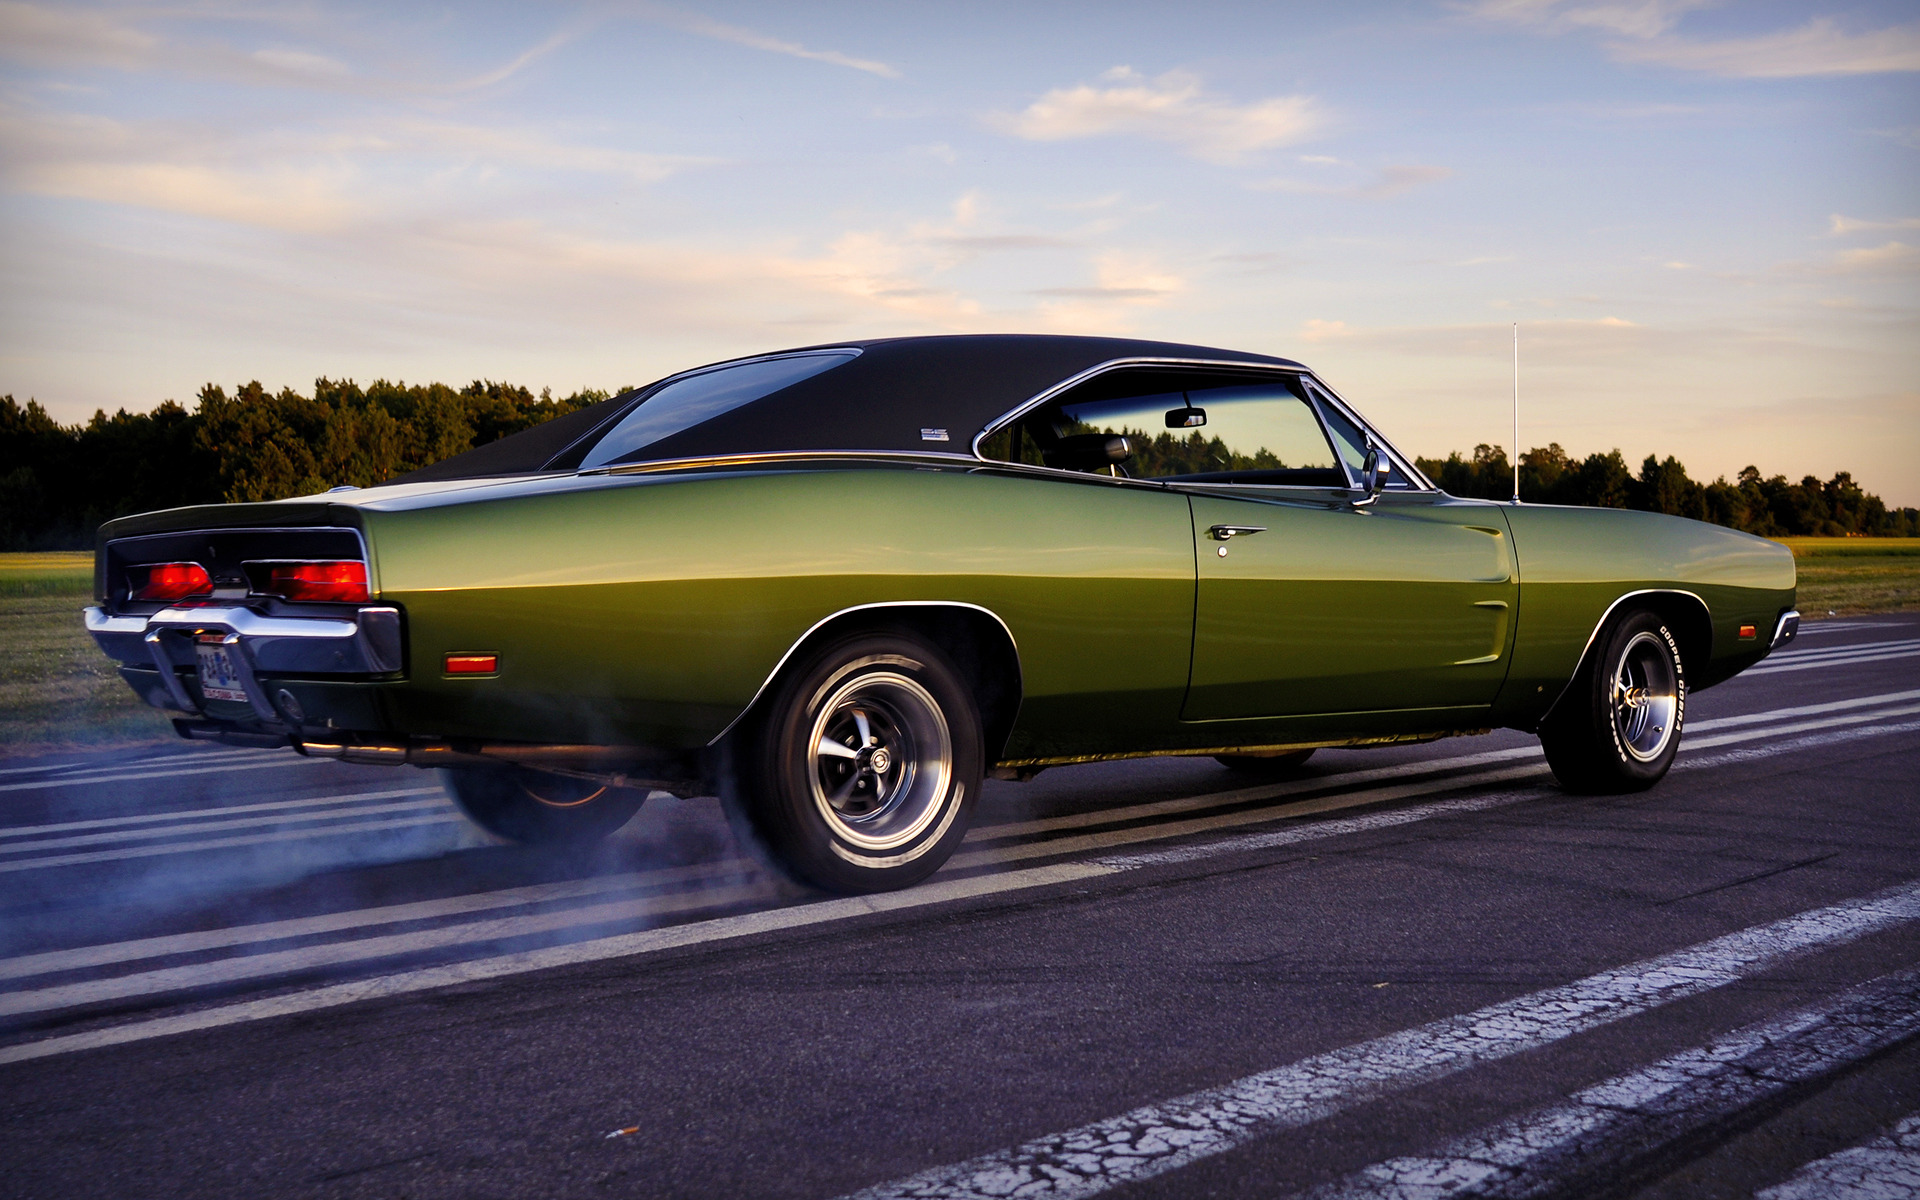 HD wallpaper - Cars - charger, Dodge, Muscle car - 1920x1200